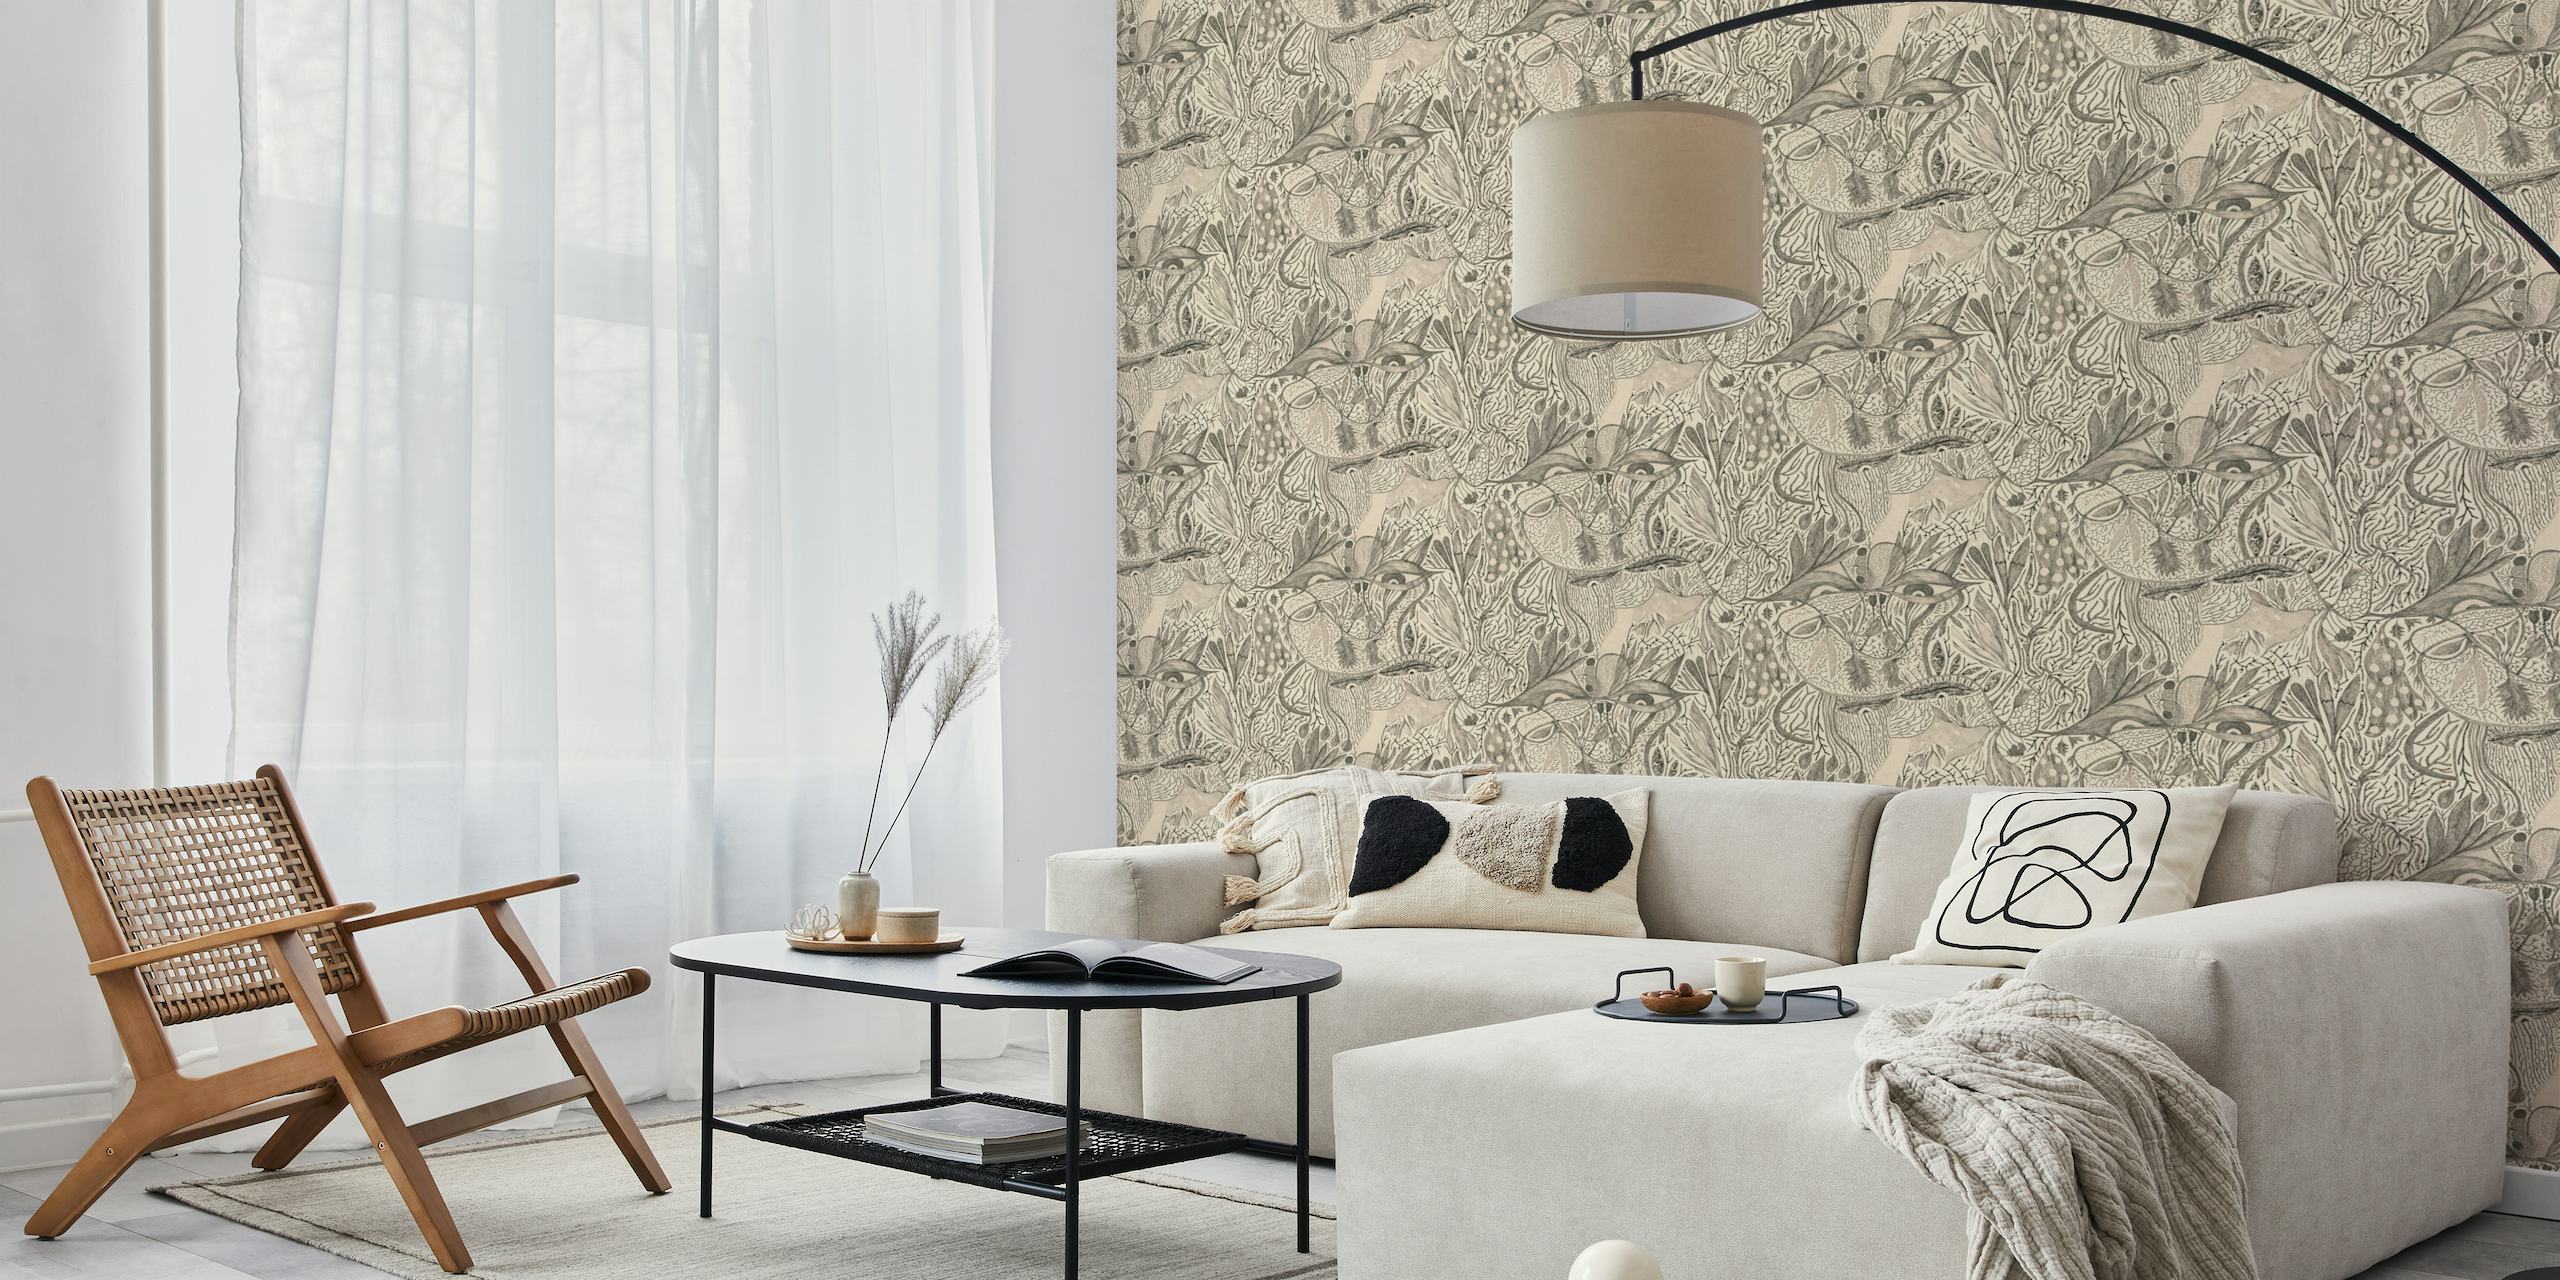 Meyes wall mural with botanical and wildlife pattern in beige tones